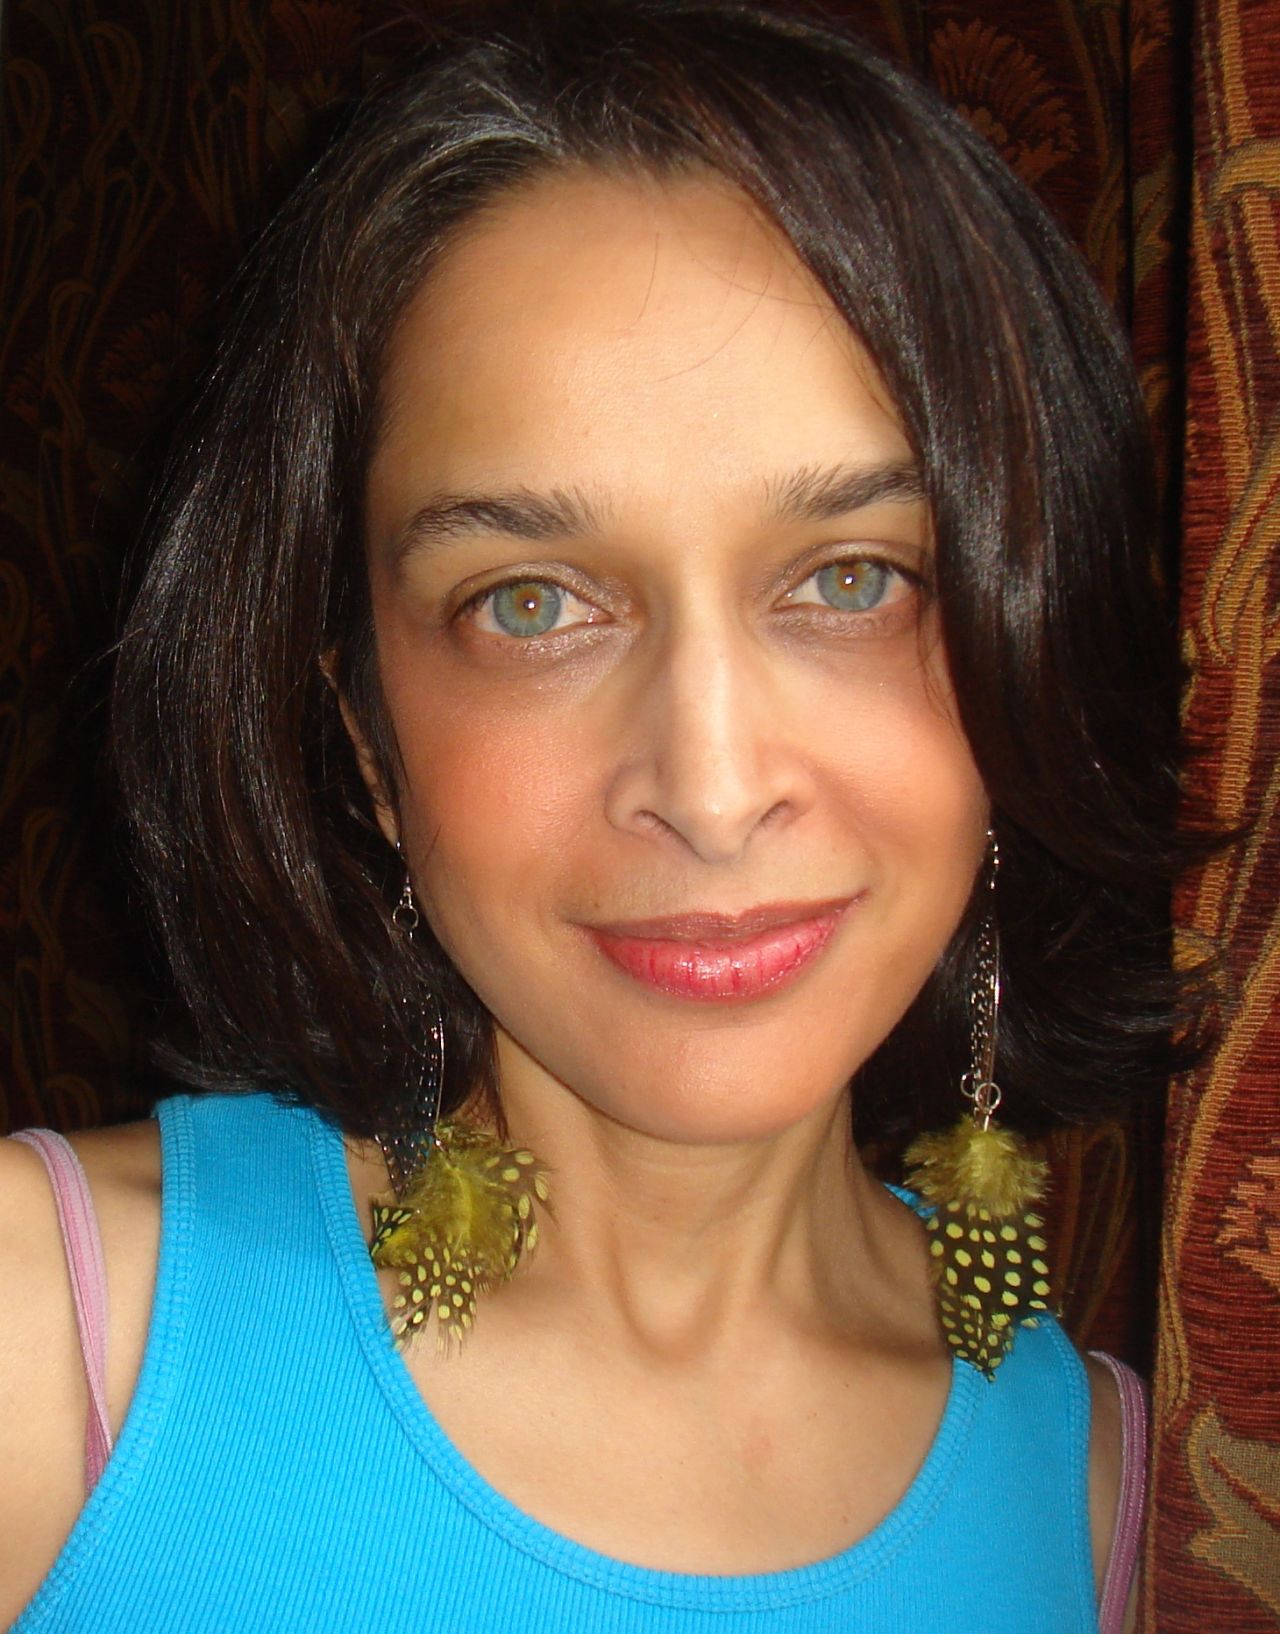 "Ideally I'd like to get to the point where one doesn't even have to speak about diversity, or even YA fiction, but simply literature," said <a href="http://www.thisistanuja.com/" target="_blank" target="_blank">Tanuja Hidier</a>, author of "Born Confused." "That said, while we're still transitioning in that direction, the more voices in the mix the better. After all, books, art, life, are ultimately about the human experience."